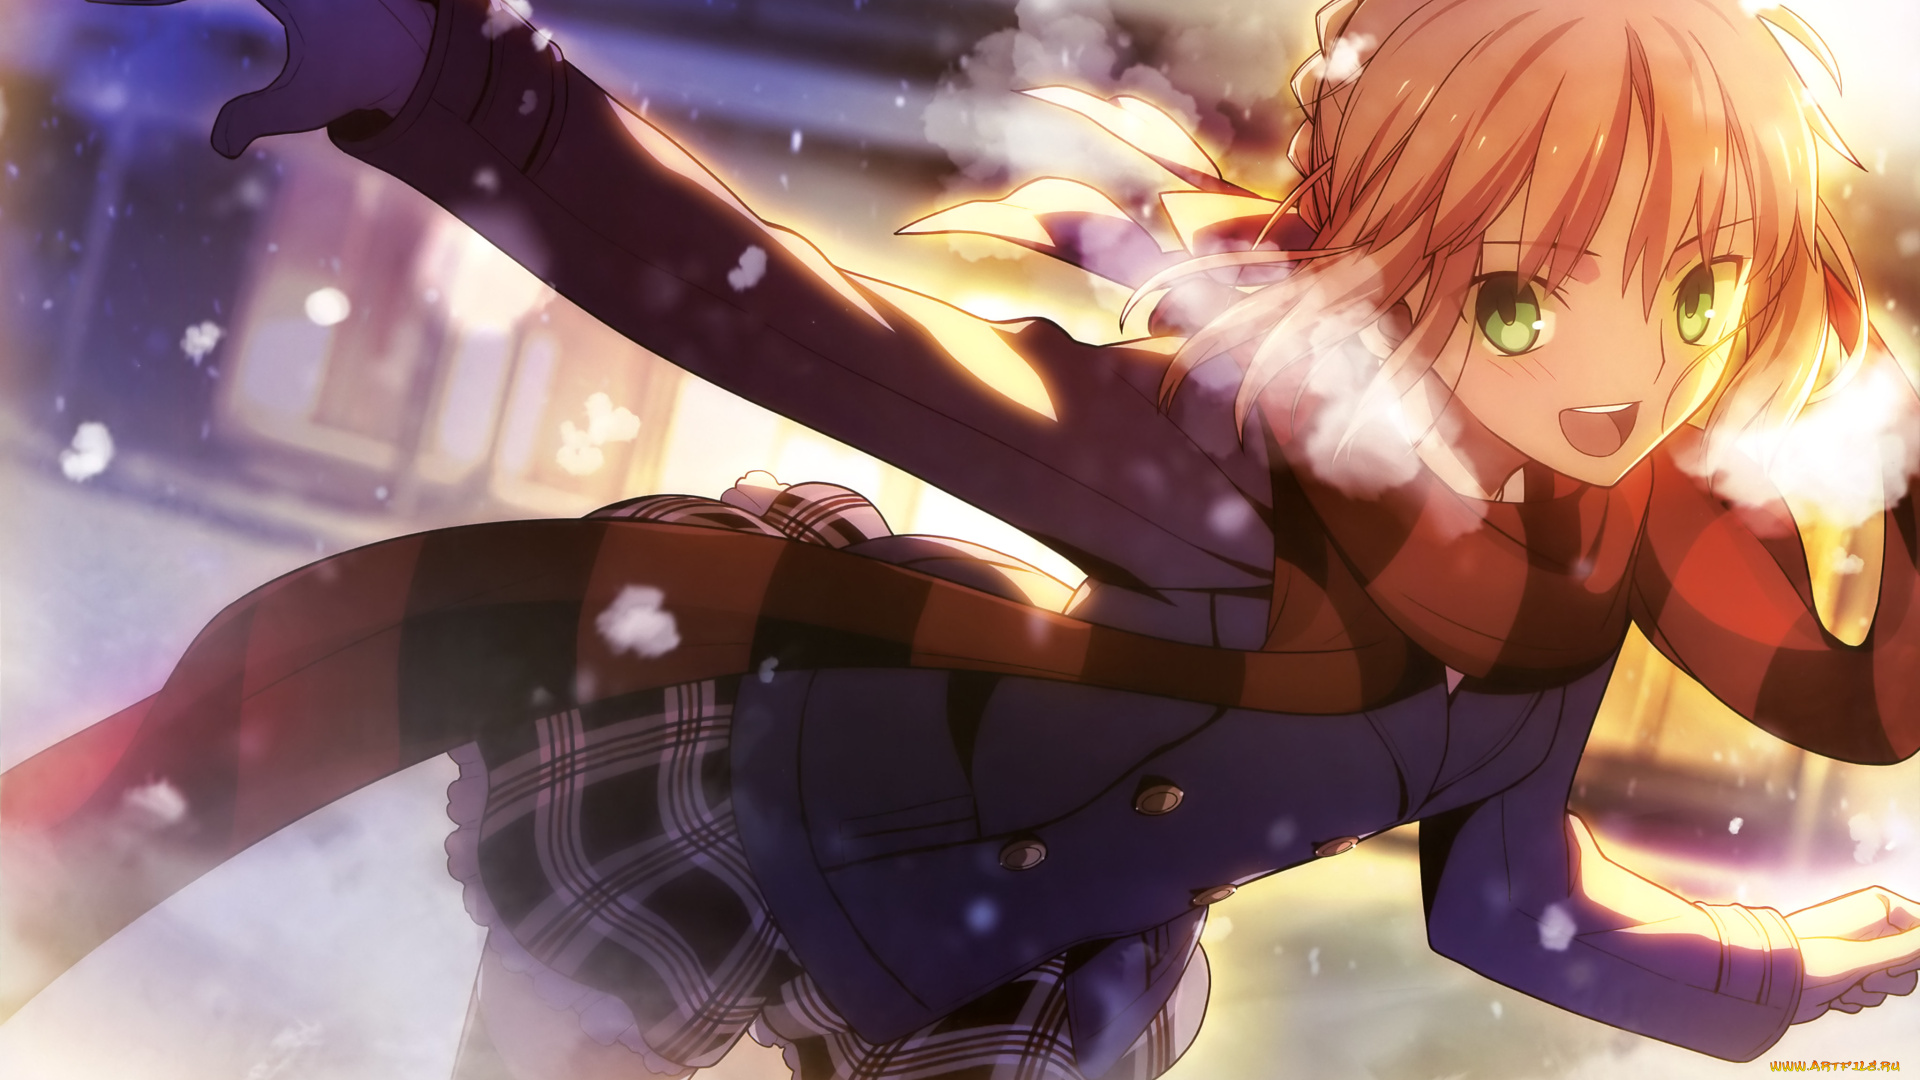 by, takeuchi, takashi, аниме, fate, stay, night, свет, солнце, снег, шарф, saber, девушка, има, улыбка, улица, дыхание